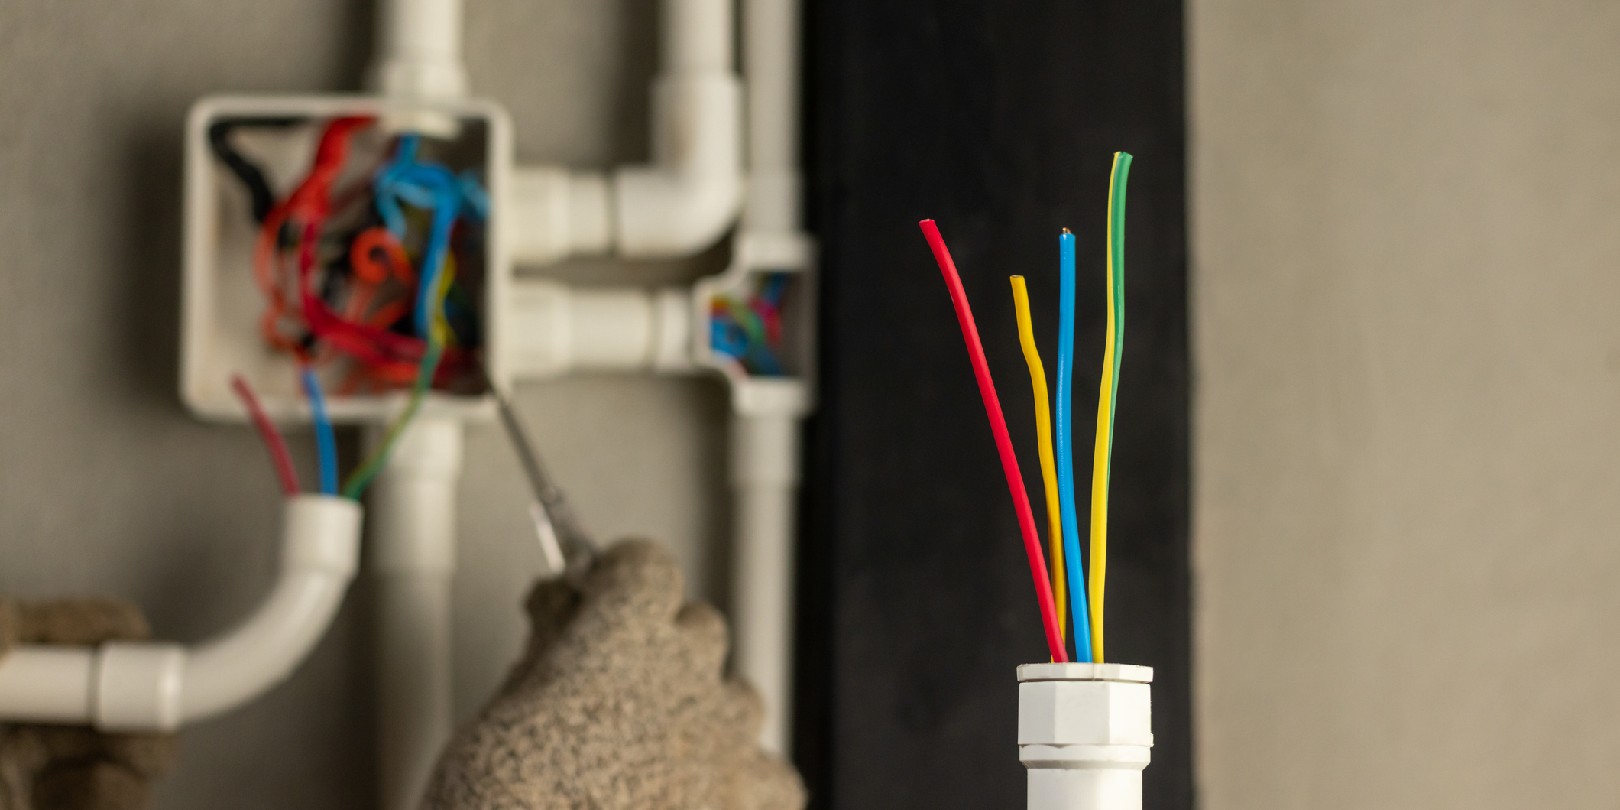 All You Need to Know About Electrical Wire Color Codes